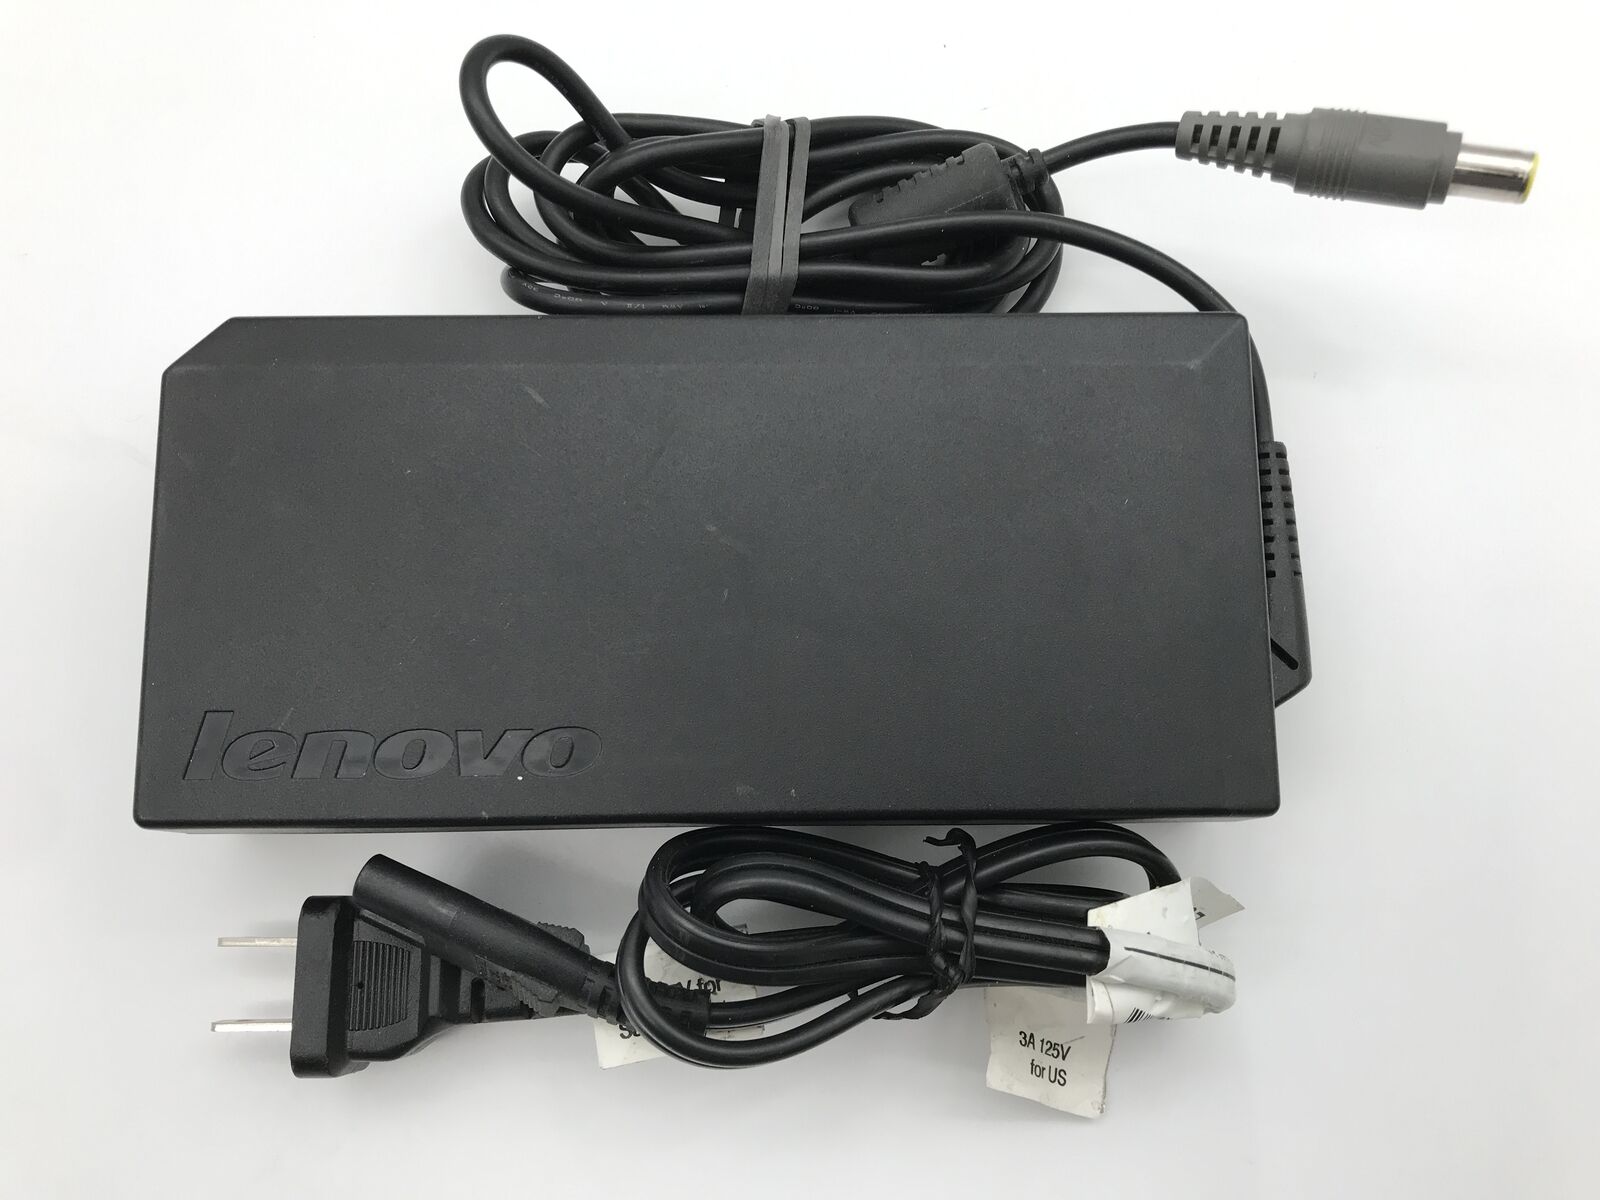 Genuine LENOVO 170W LAPTOP AC ADAPTER 20V 8.5A YELLOW TIP 45N0113